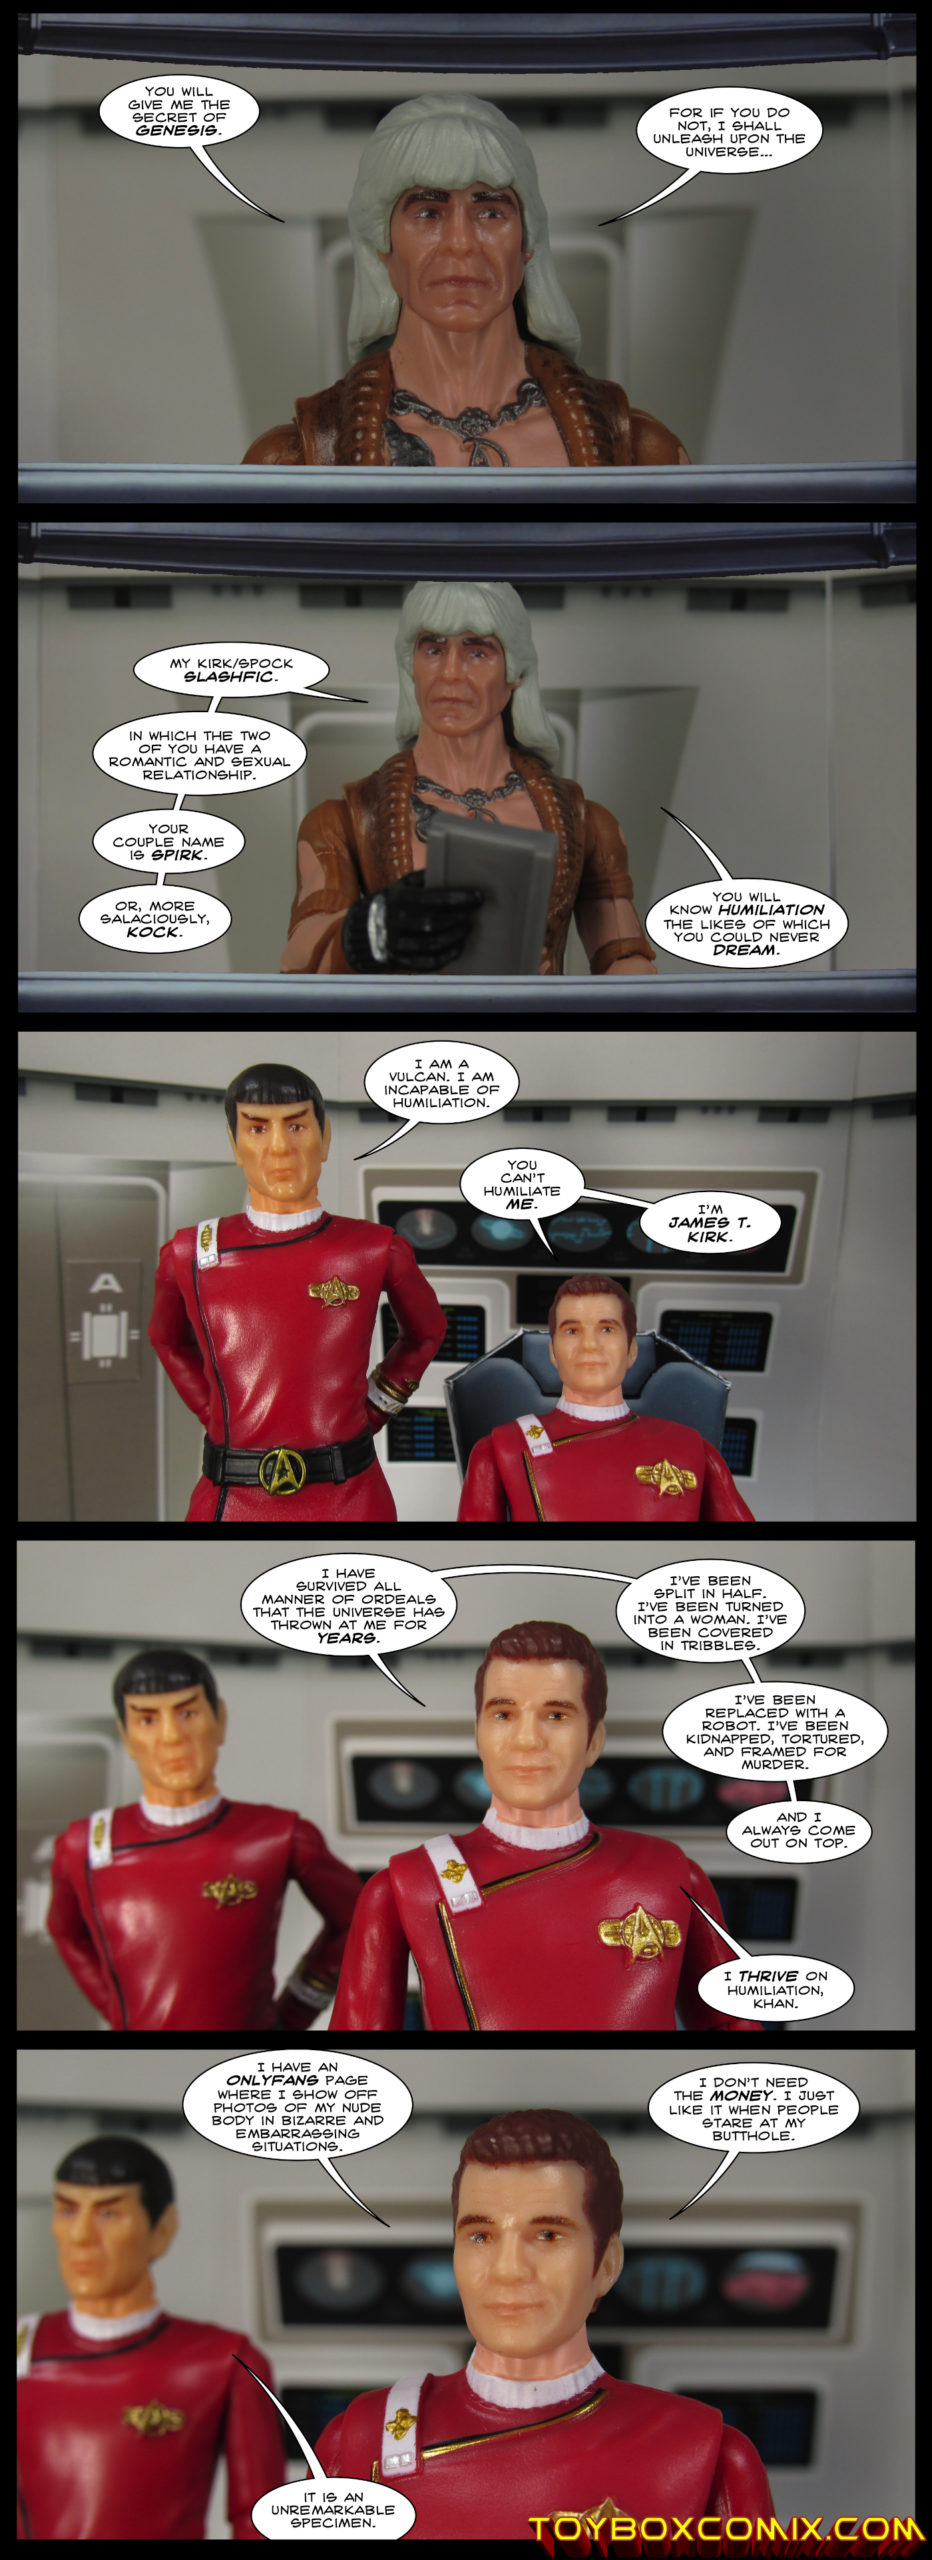 First panel: Khan Noonien Singh: “You will give me the secret of Genesis. For if you do not, I shall unleash upon the universe…” Second panel: Khan: “My Kirk/Spock slashfic. In which the two of you have a romantic and sexual relationship. Your couple name is Spirk. Or, more salaciously, Kock. You will know humiliation the likes of which you could never dream. Third panel: Spock: “I am a Vulcan. I am incapable of humiliation.” Kirk: “You can’t humiliate me. I’m James T. Kirk.” Fourth panel: Kirk: “I have survived all manner of ordeals that the universe has thrown at me for years. I’ve been split in half. I’ve been turned into a woman. I’ve been covered in tribbles. I’ve been replaced with a robot. I’ve been kidnapped, tortured, and framed for murder. And I always come out on top. I thrive on humiliation, Khan.” Fifth panel: Kirk: “I have an OnlyFans page where I show off photos of my nude body in bizarre and embarrassing situations. I don’t need the money. I just like it when people stare at my butthole.” Spock: “It is an unremarkable specimen.”